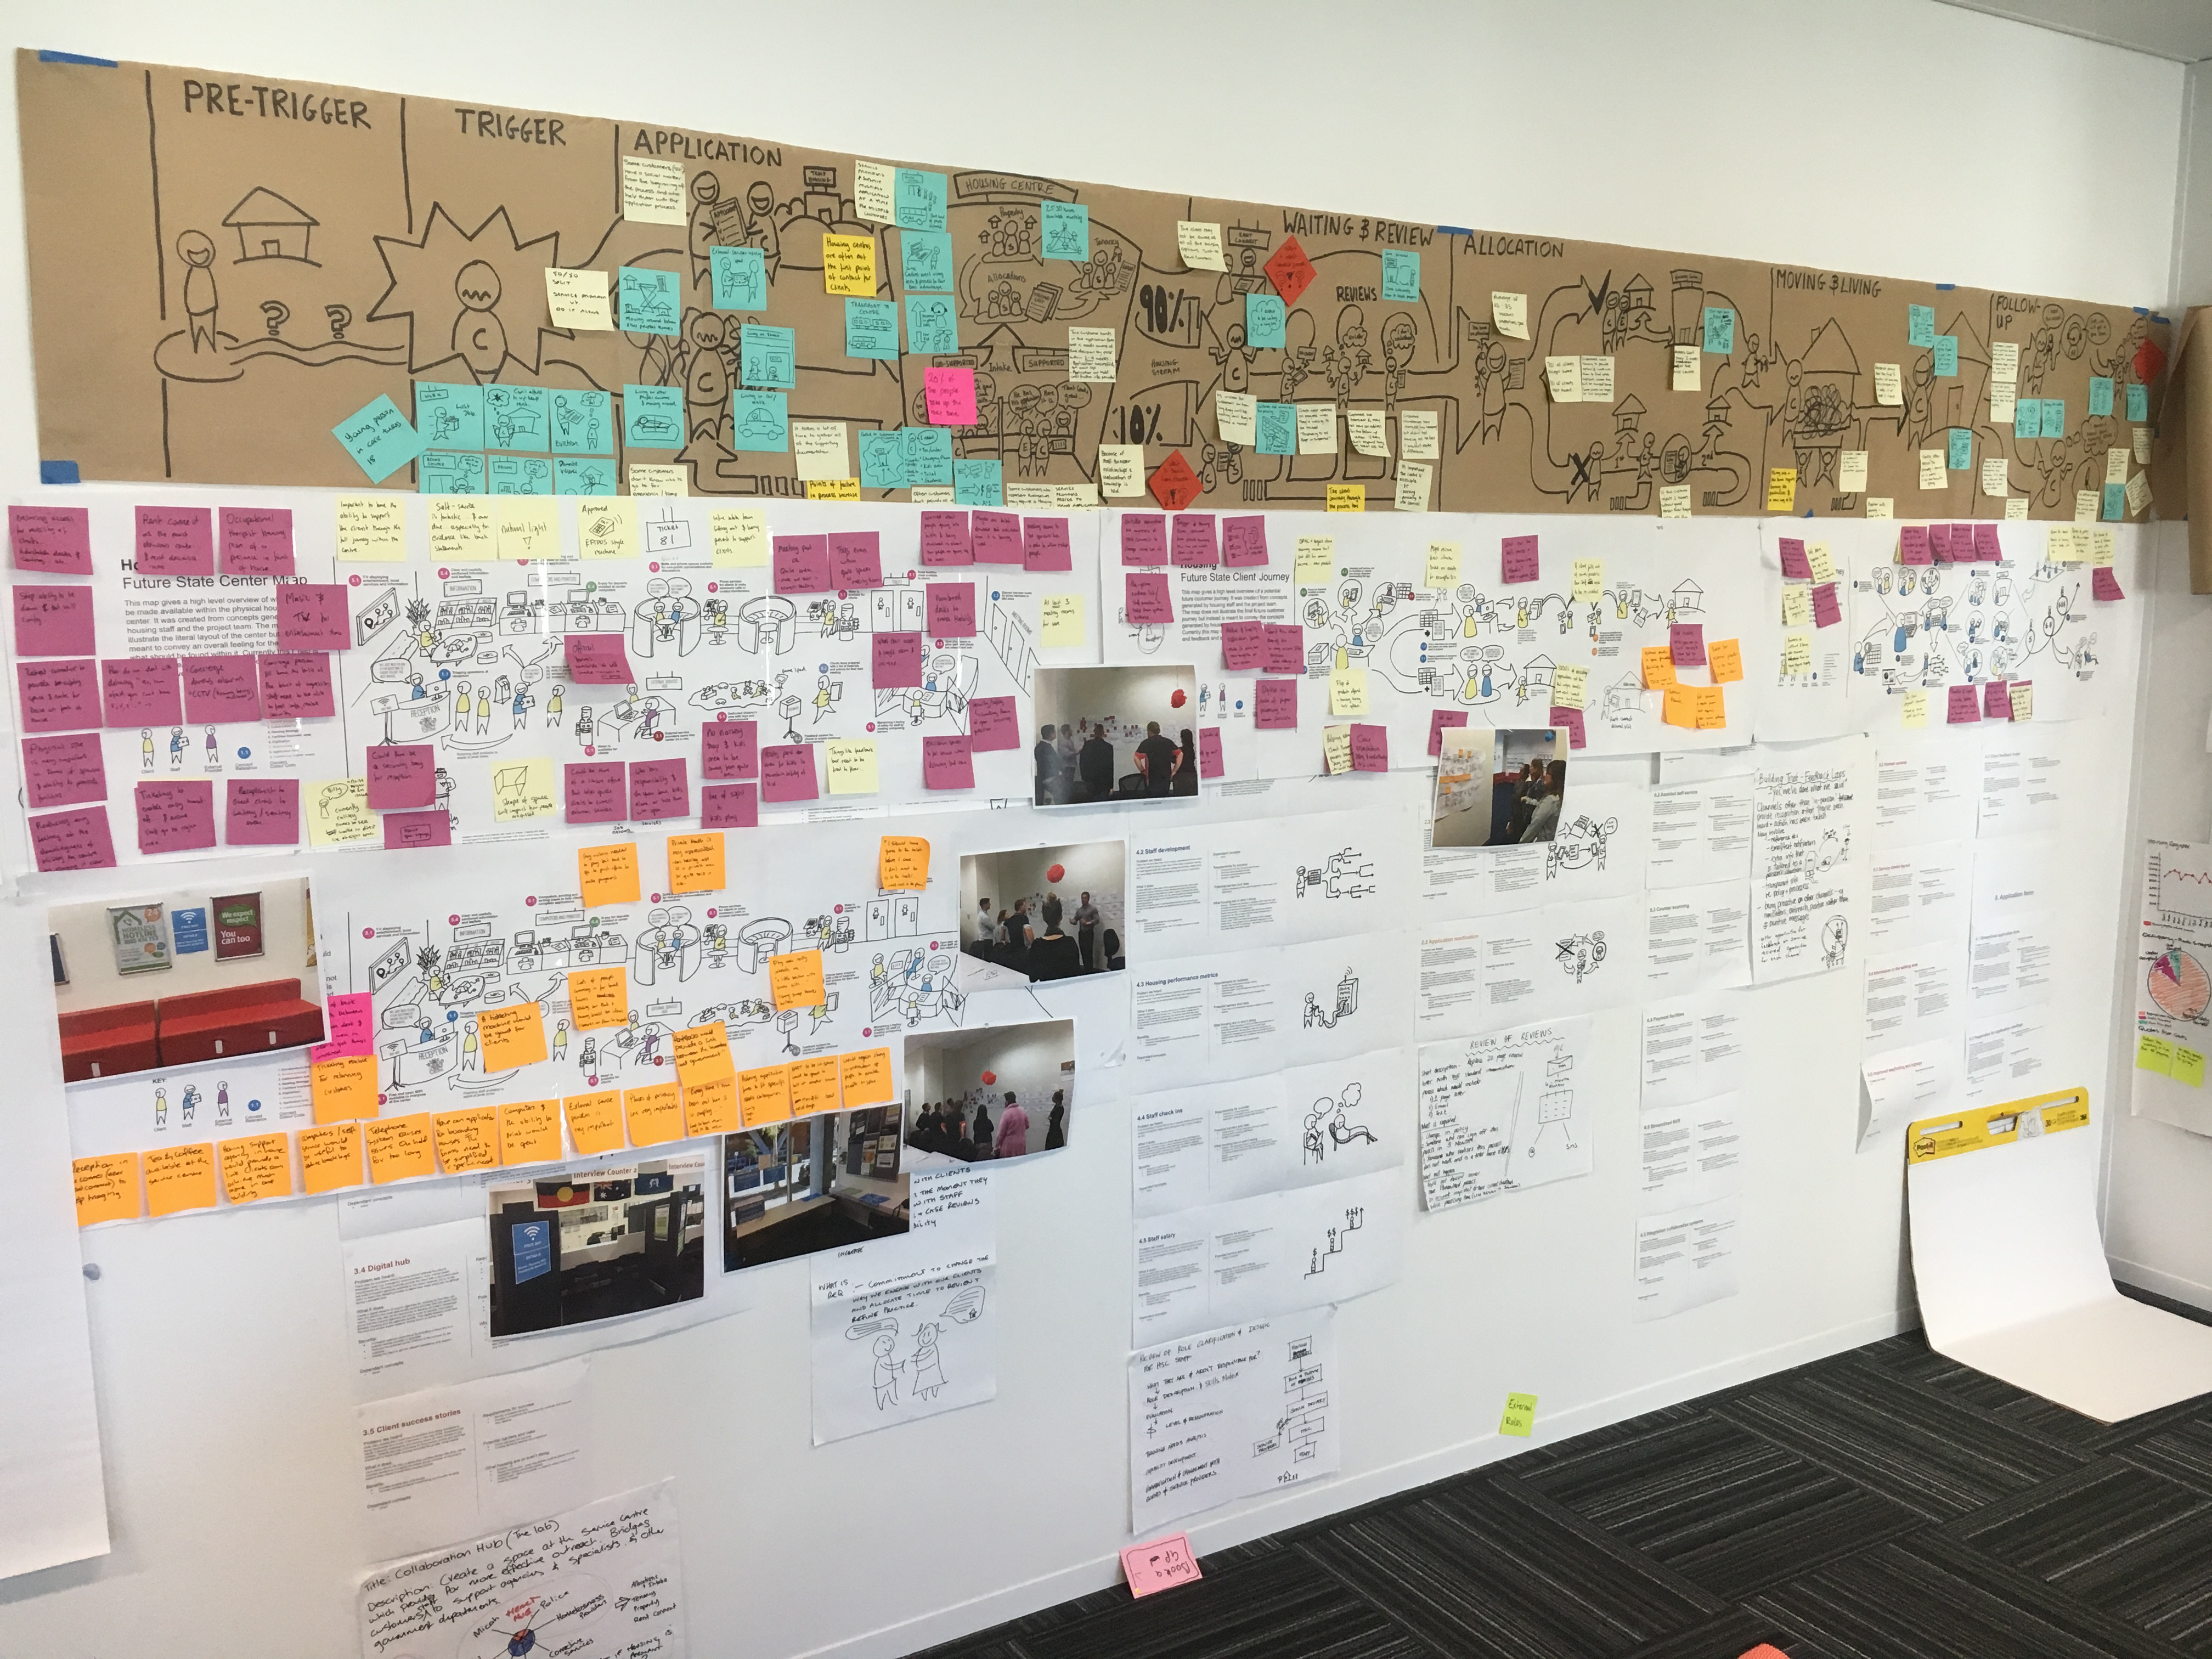 The project wall showing current state journey map research with customers.